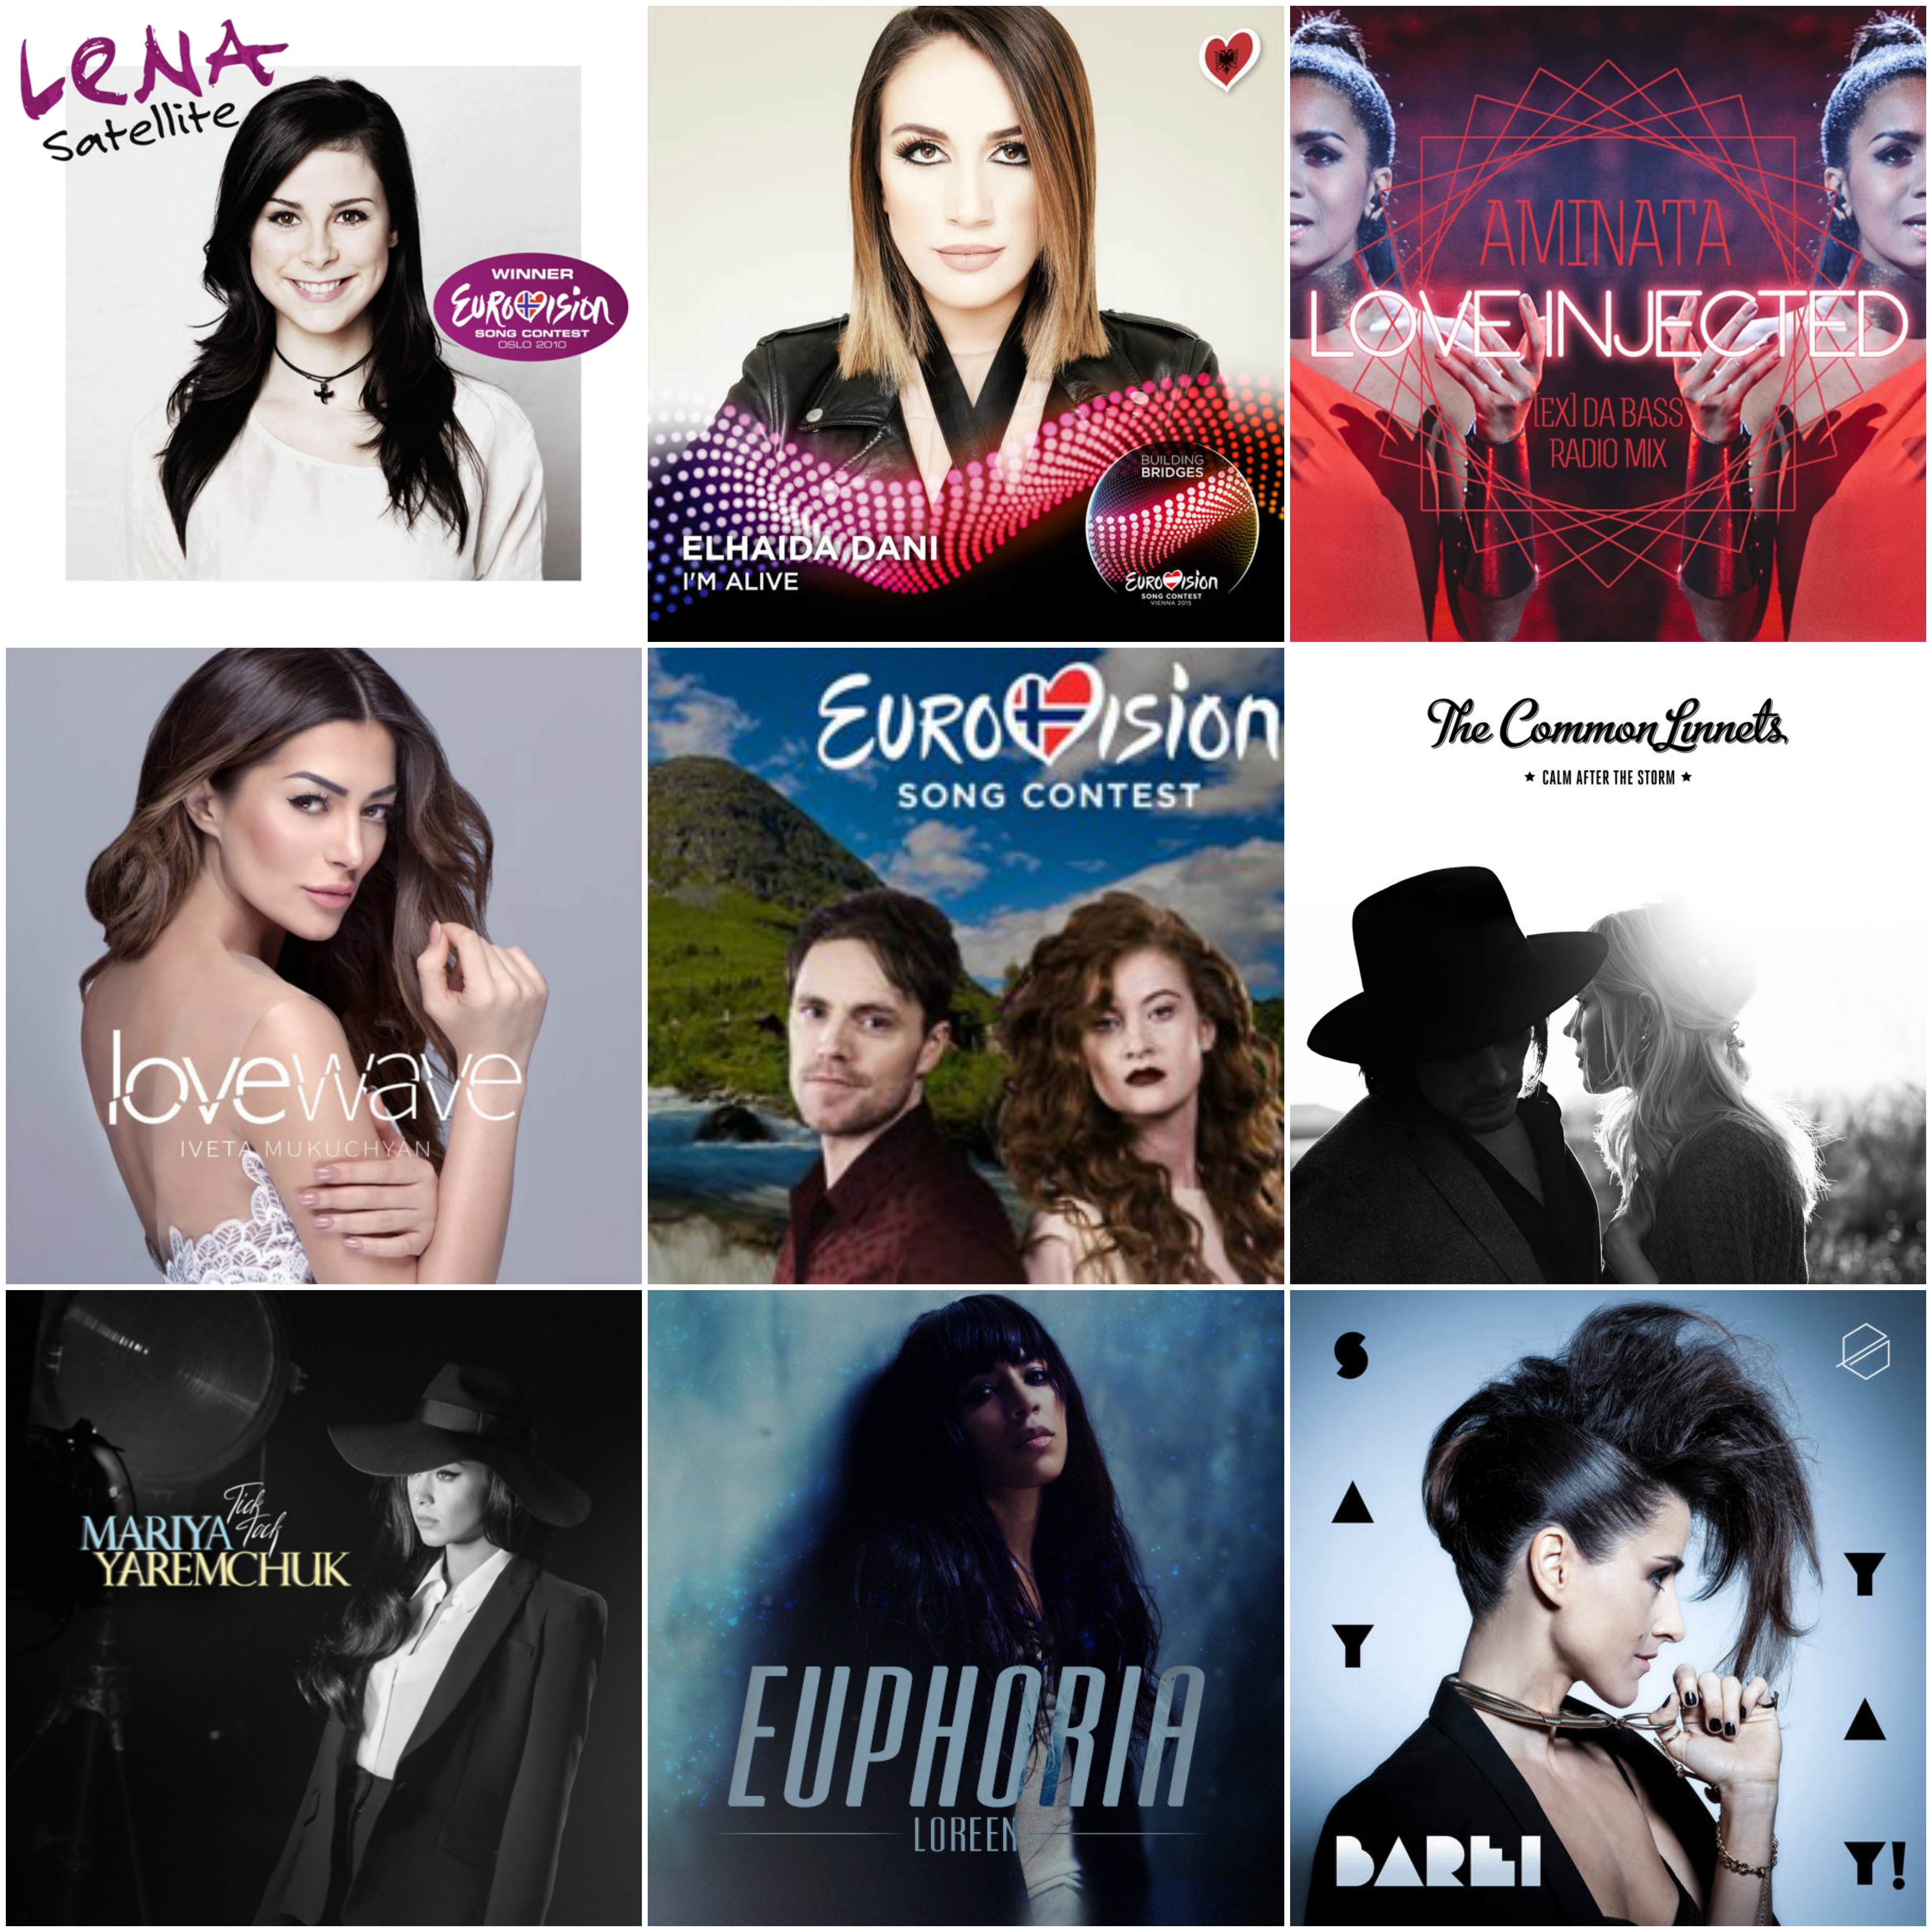 Euer Lieblings Eurovision Song Contest Lied / Gruppe 3 / Runde 1